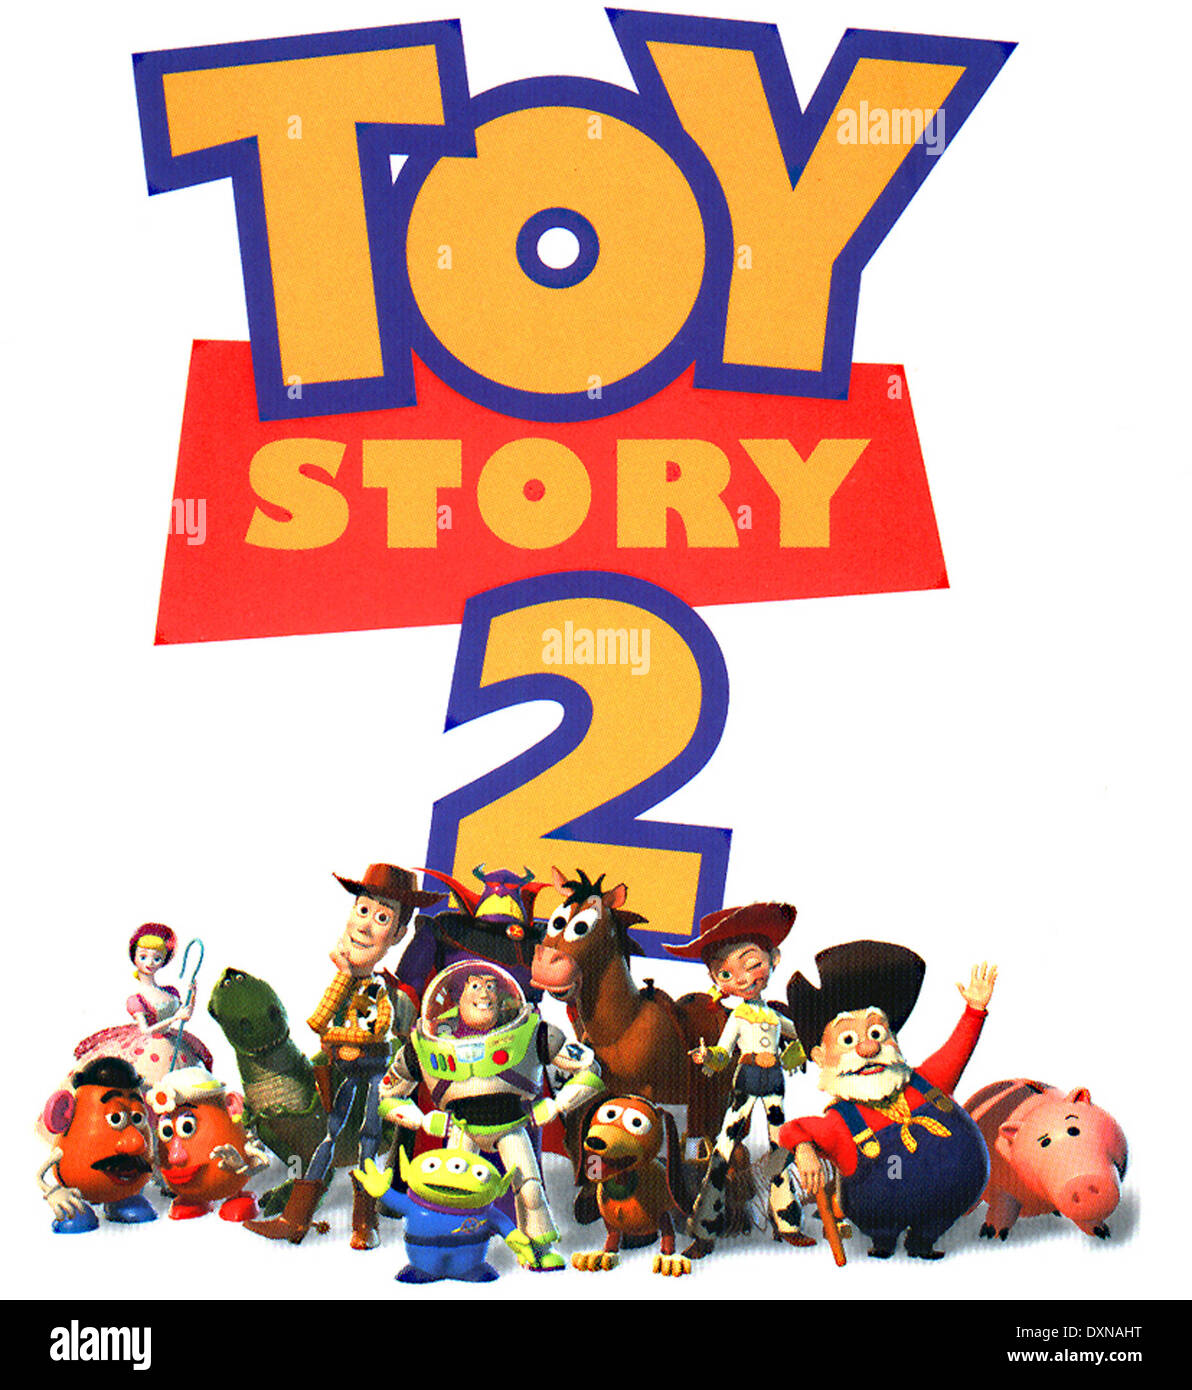 TOY STORY 2 Banque D'Images